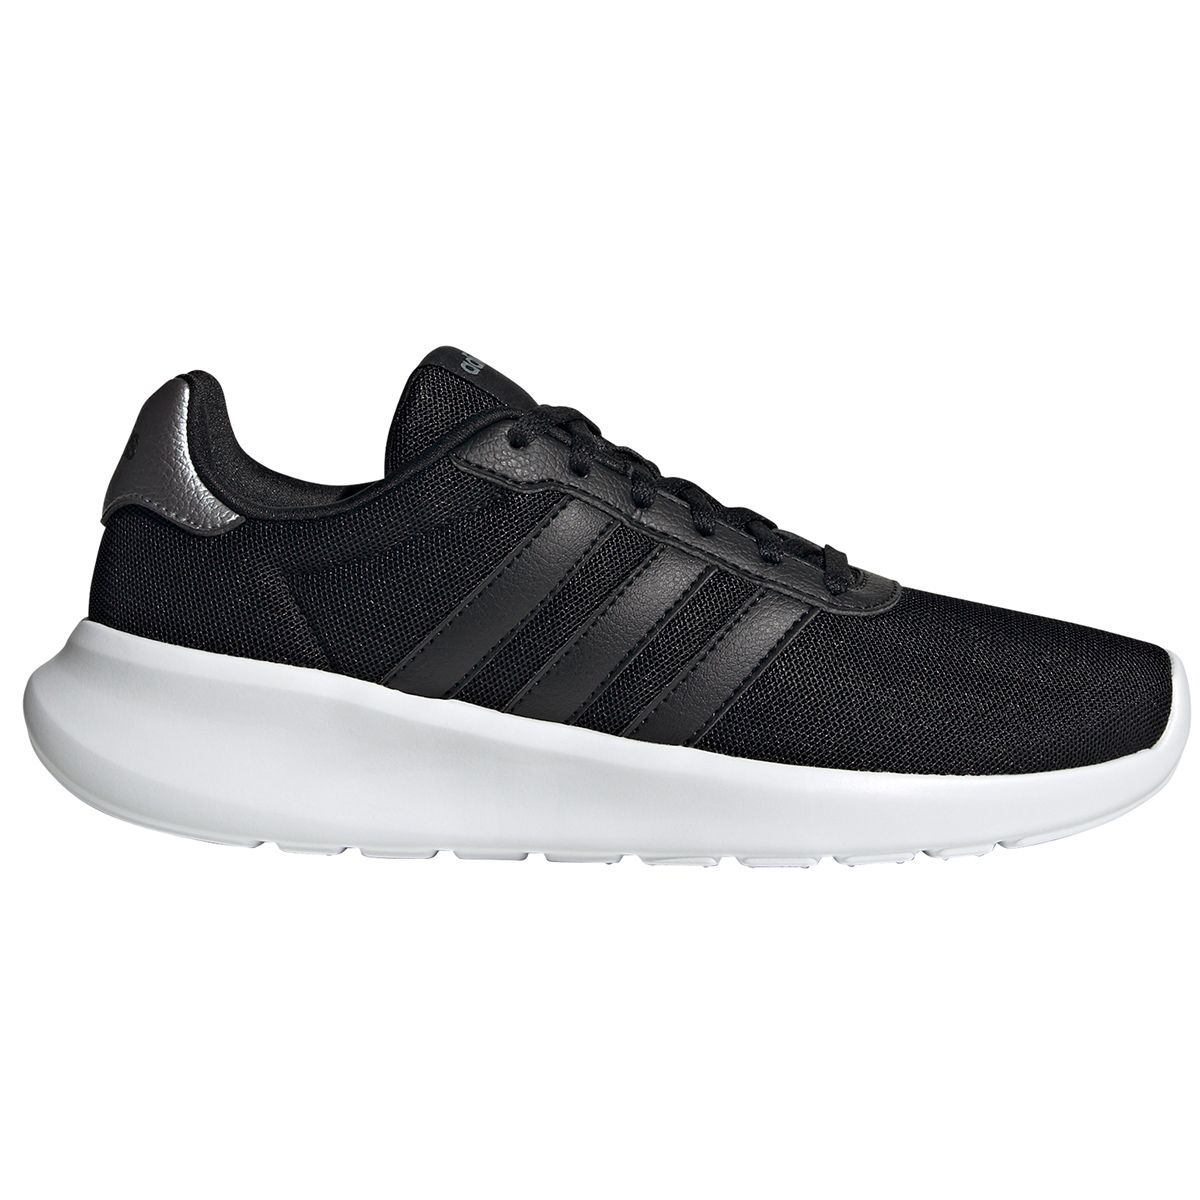 adidas Lite Racer 3.0 Women's Running Shoes GY0699